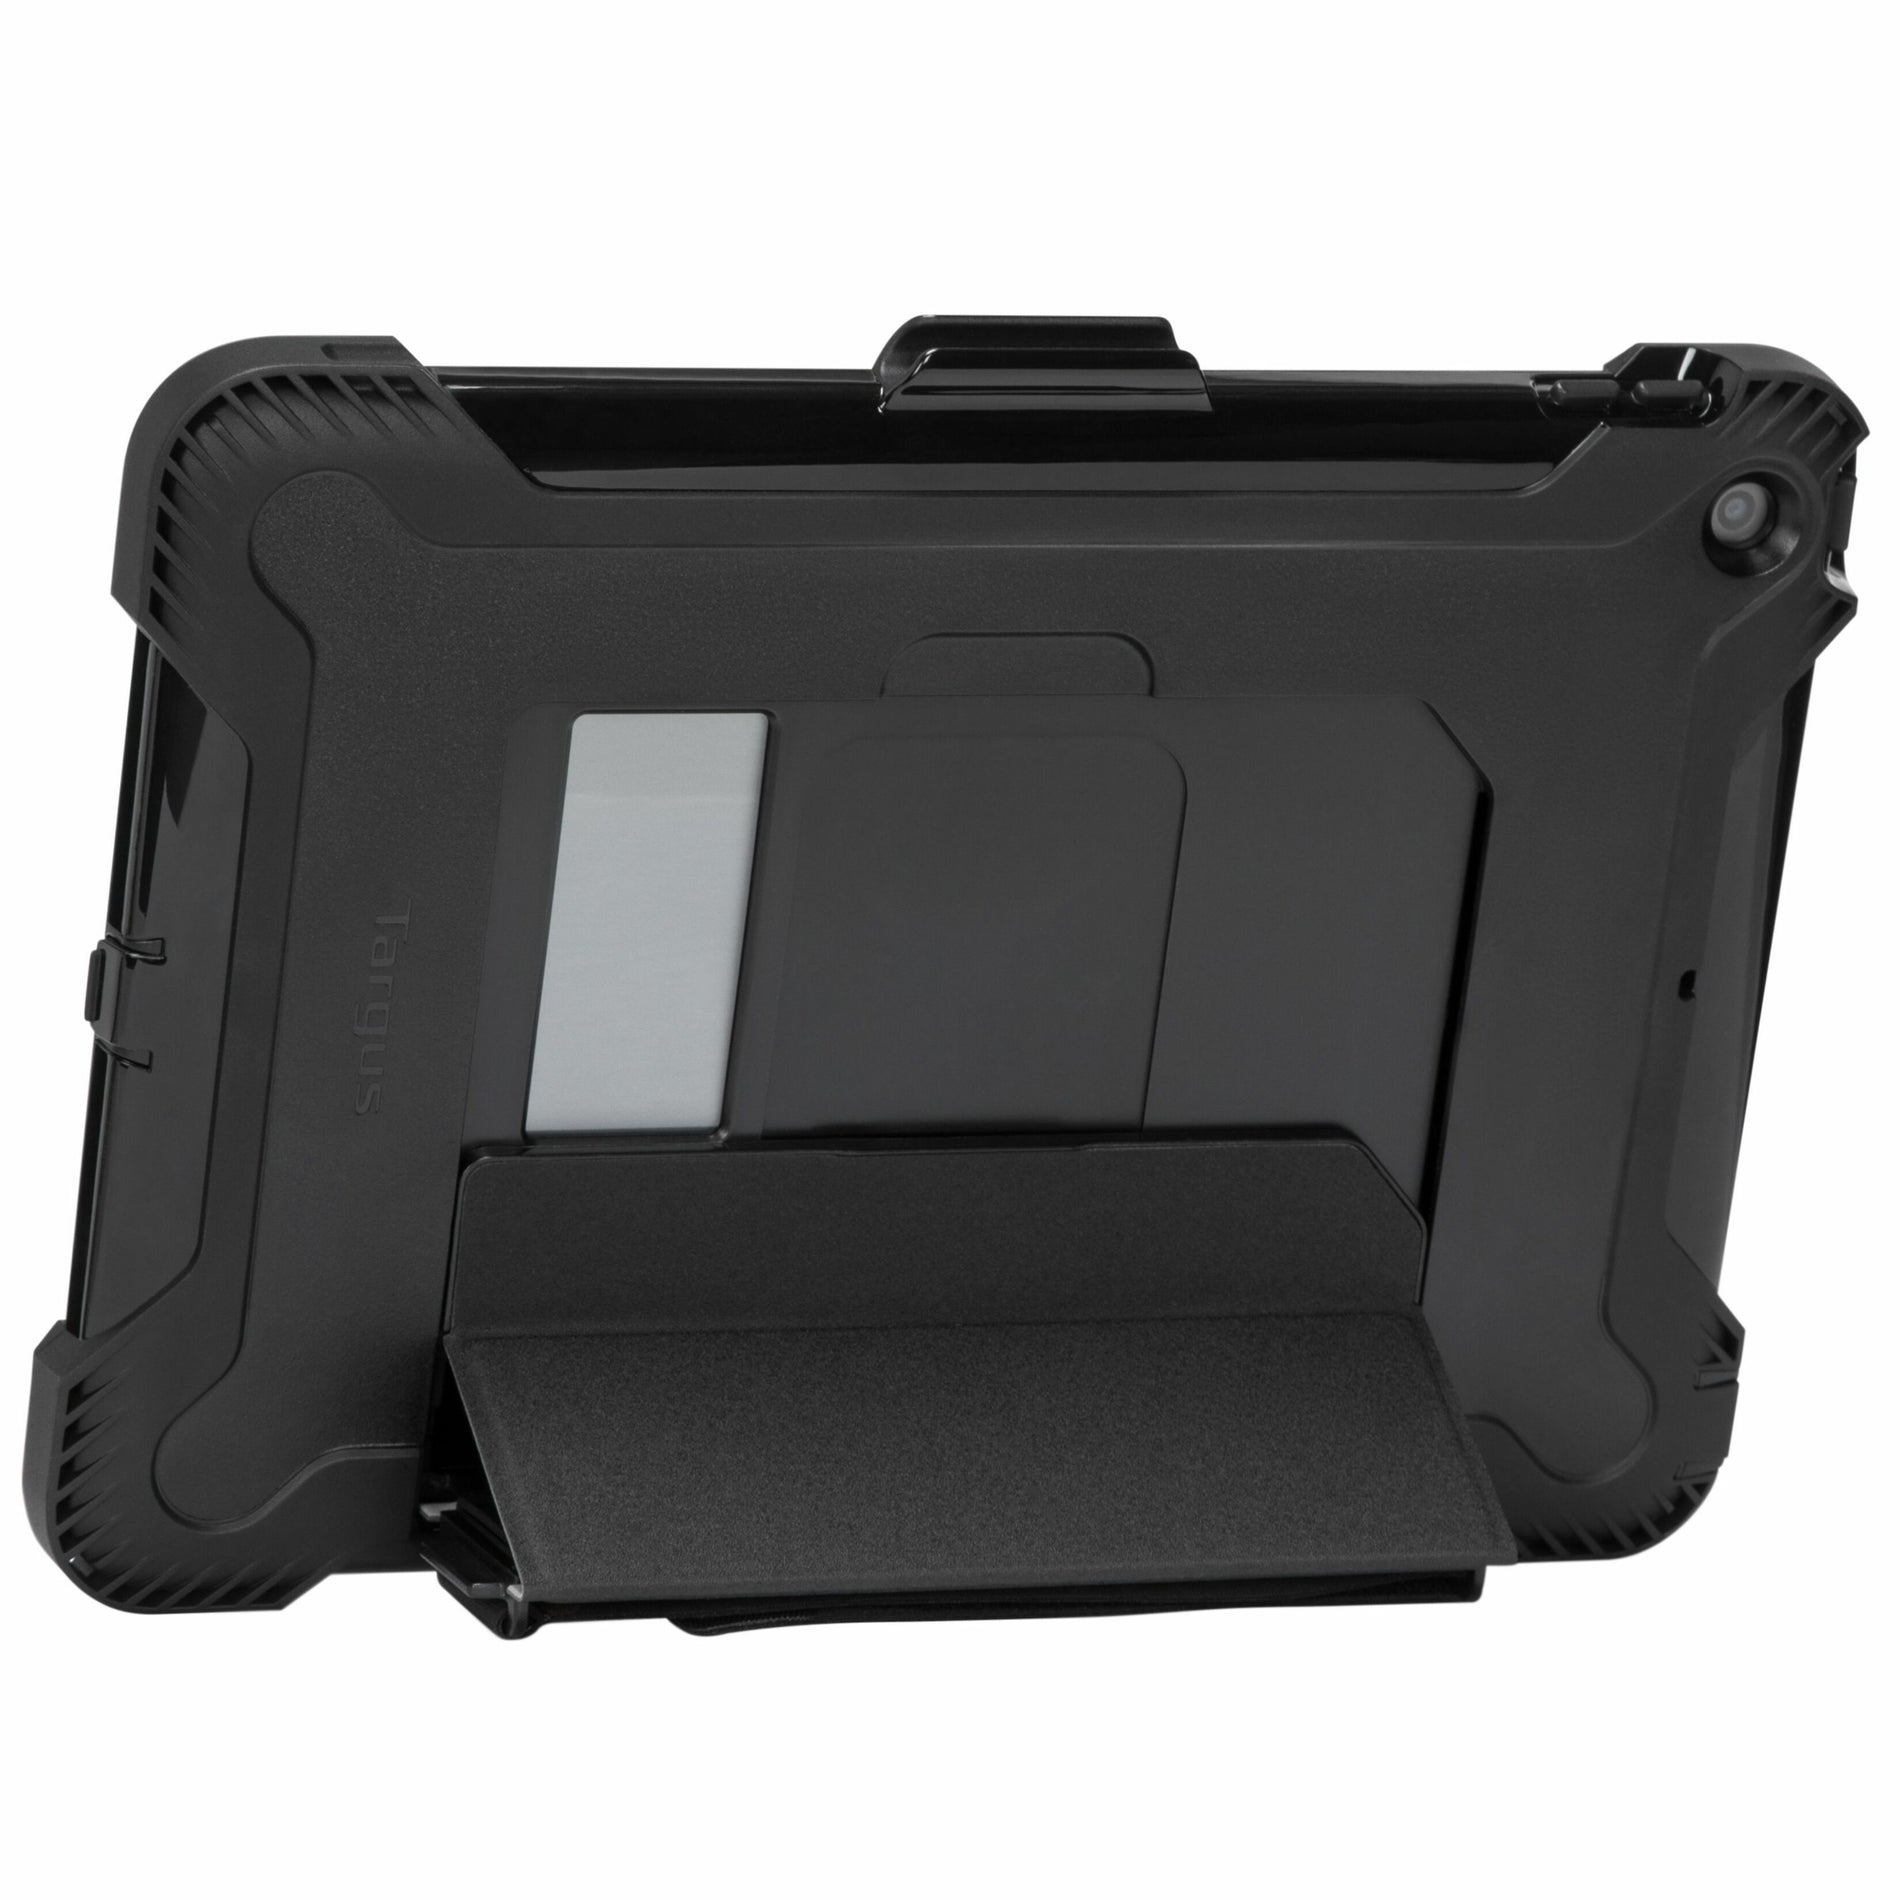 Targus THD500GL SafePort Rugged Case for 10.2" to 10.5" Apple iPad, Black